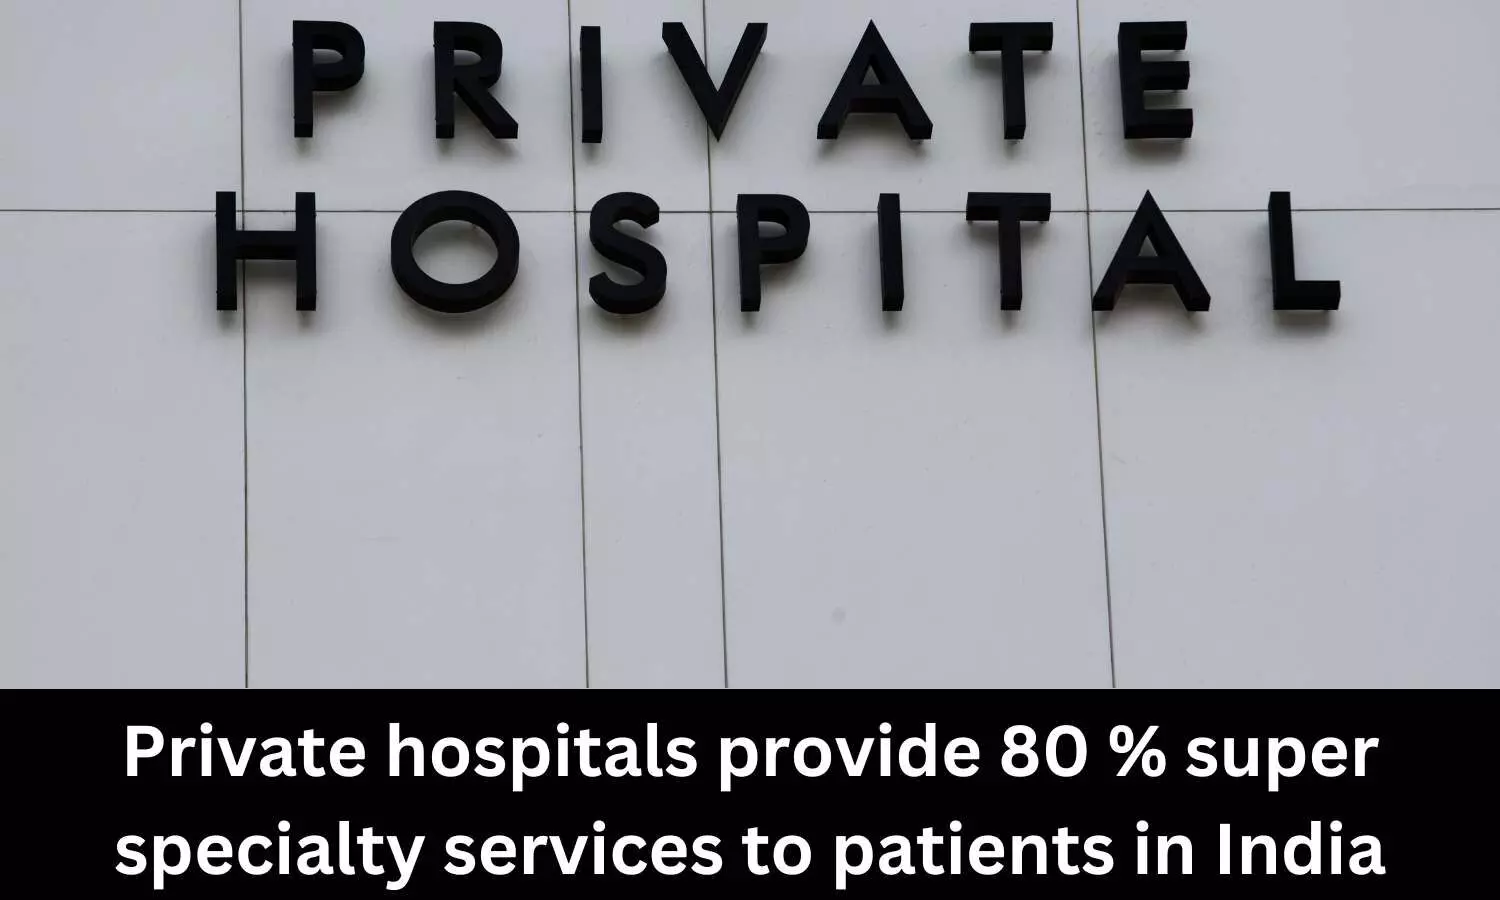 Private hospitals provide 80 percent super specialty services to patients in India